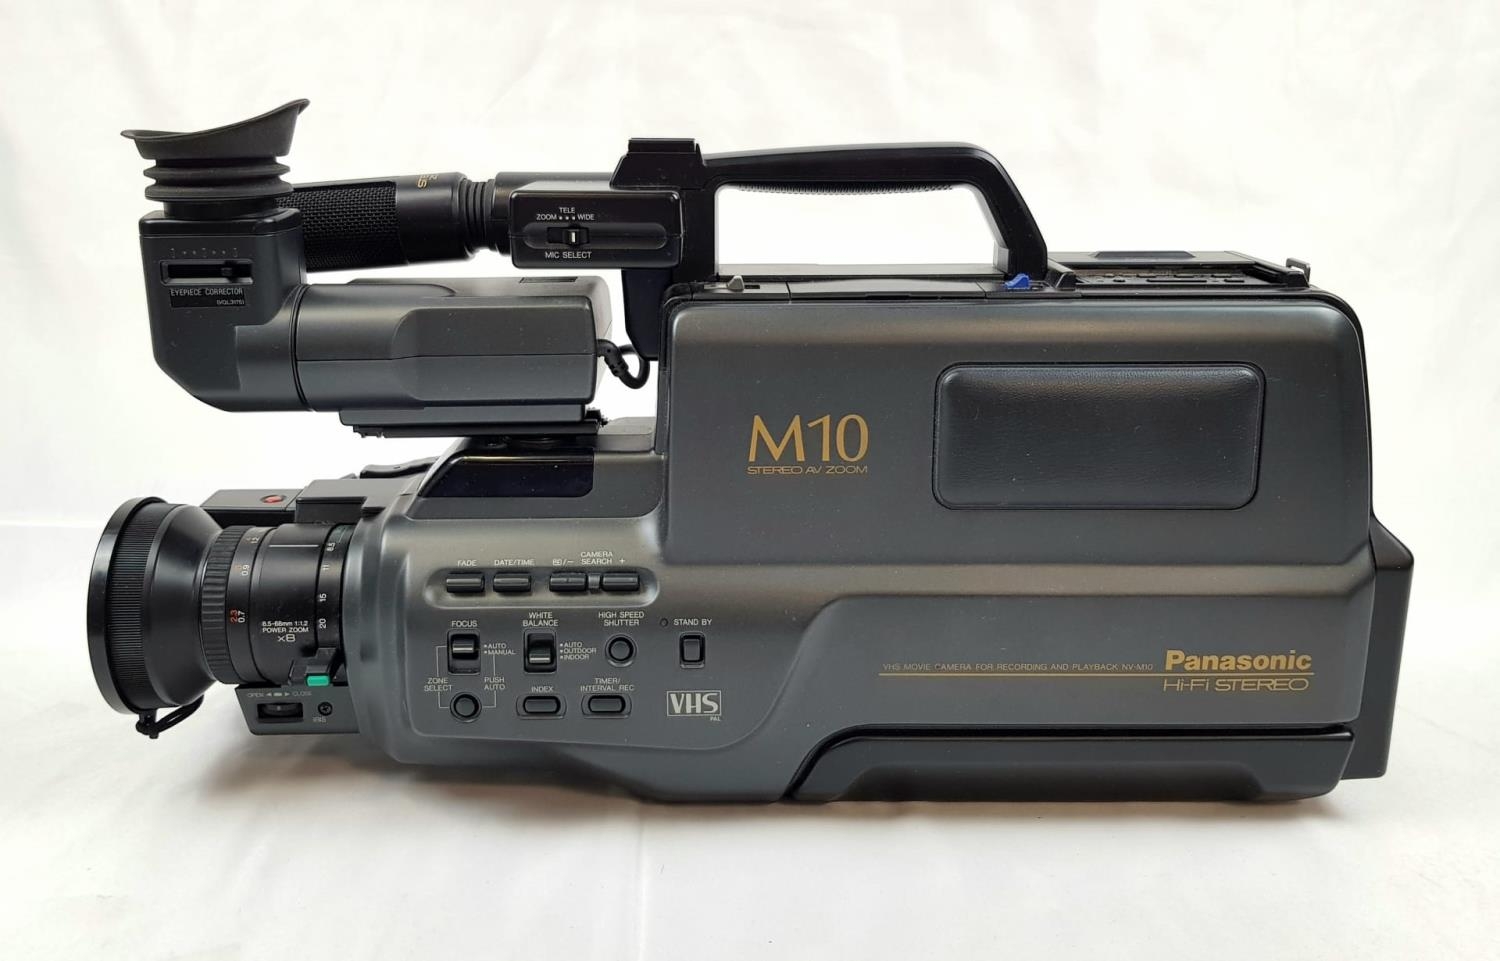 A Panasonic NV-M10 Camcorder. Comes with battery pack, cables and instructions - in original case. - Image 8 of 28